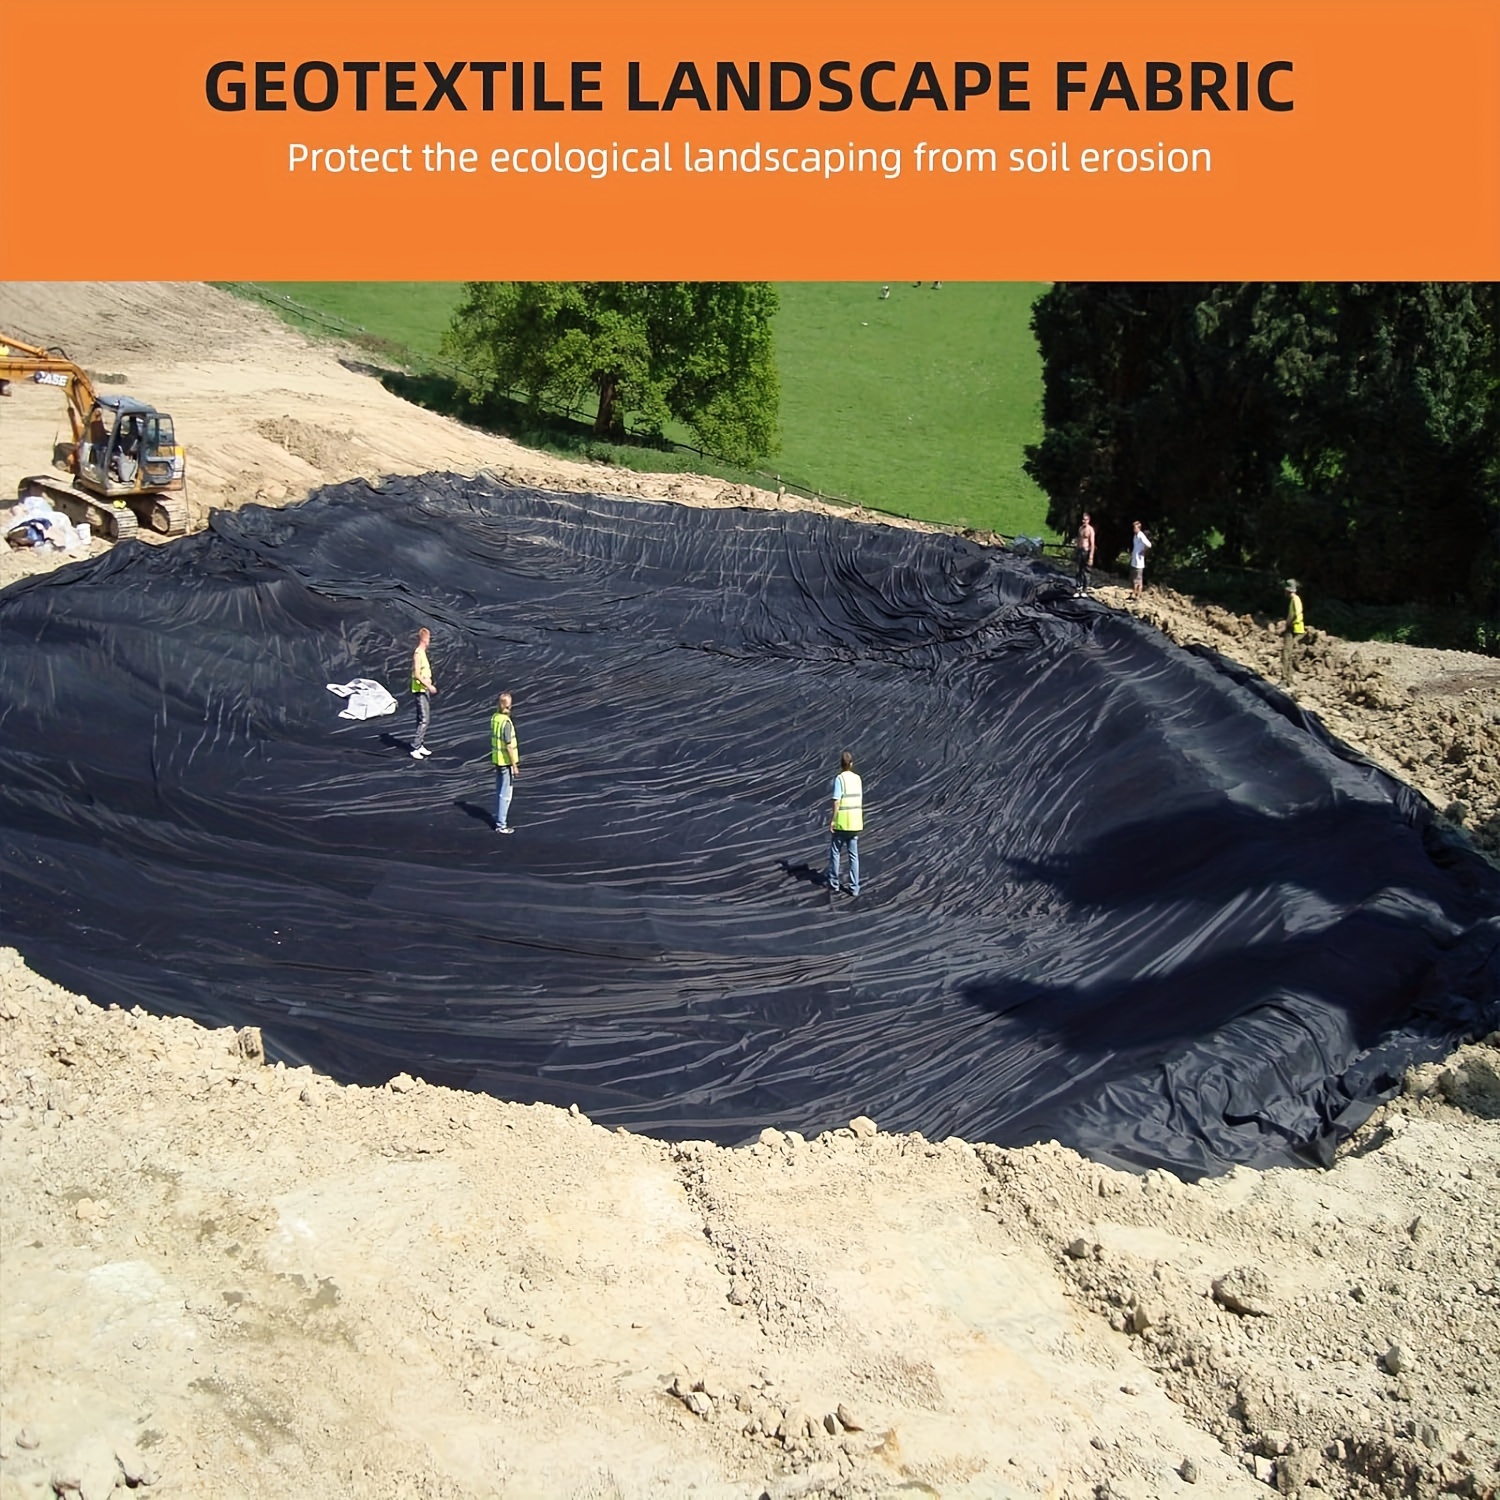 geotextile landscape 3t x 100ft 6oz geotextile fabric pp drainage 350n tensile strength 440n load capacity for driveway road stabilizationr erosion control french drains